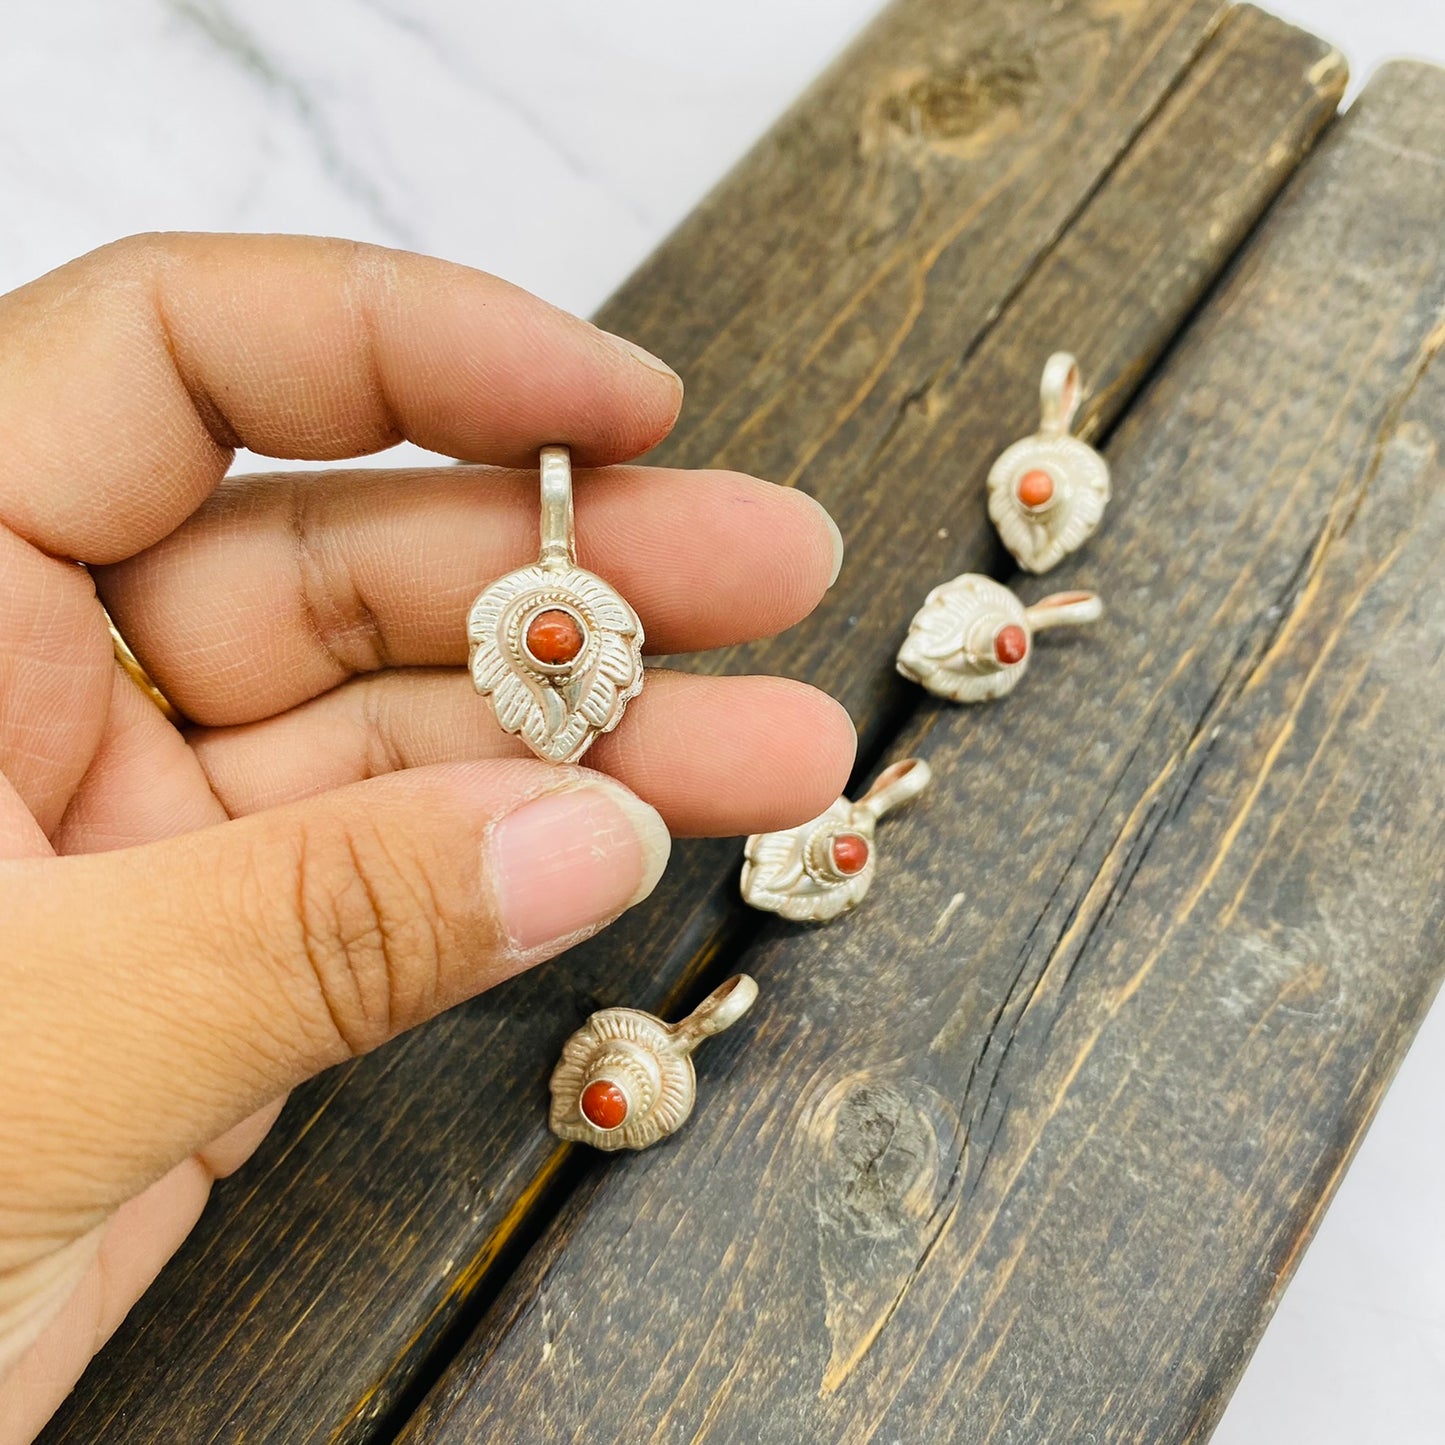 Sterling Silver Coral Pendant, Double Sided Coral Charms, Handmade Bohemian Jewelry, Silver Wrapped Jewelry, Natural Stone Unisex Pendant